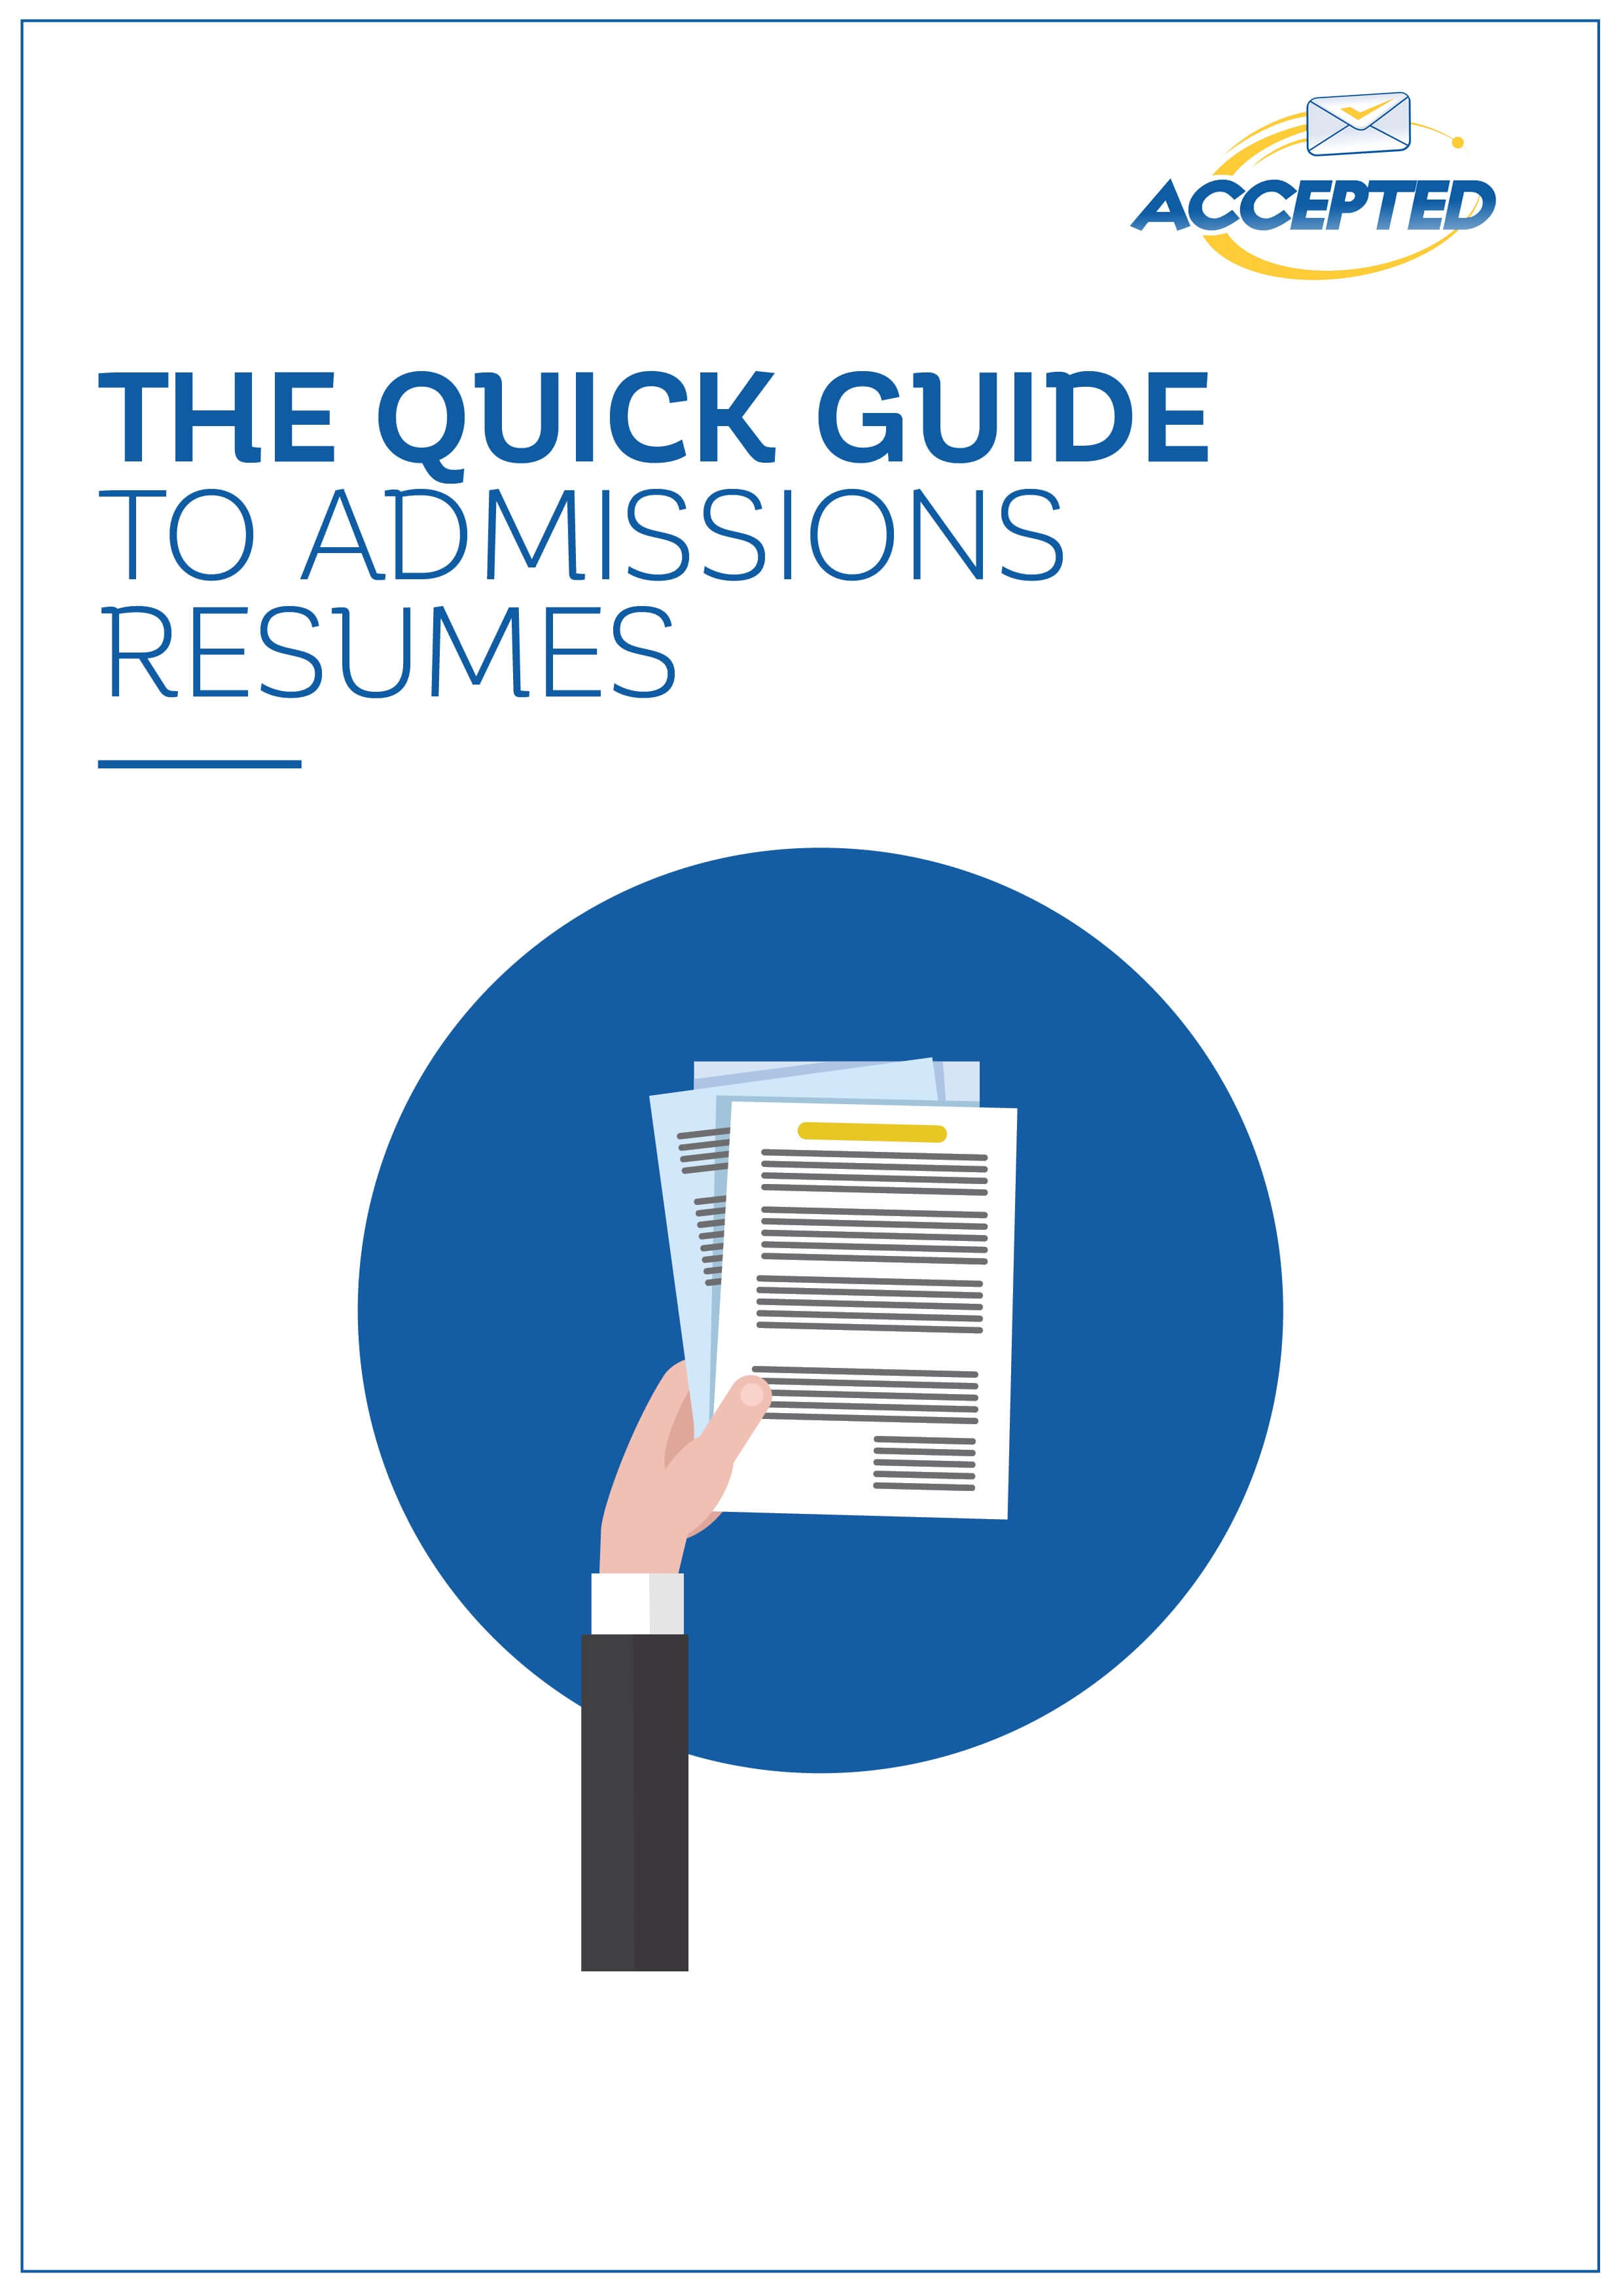 Admissions Resumes Guide